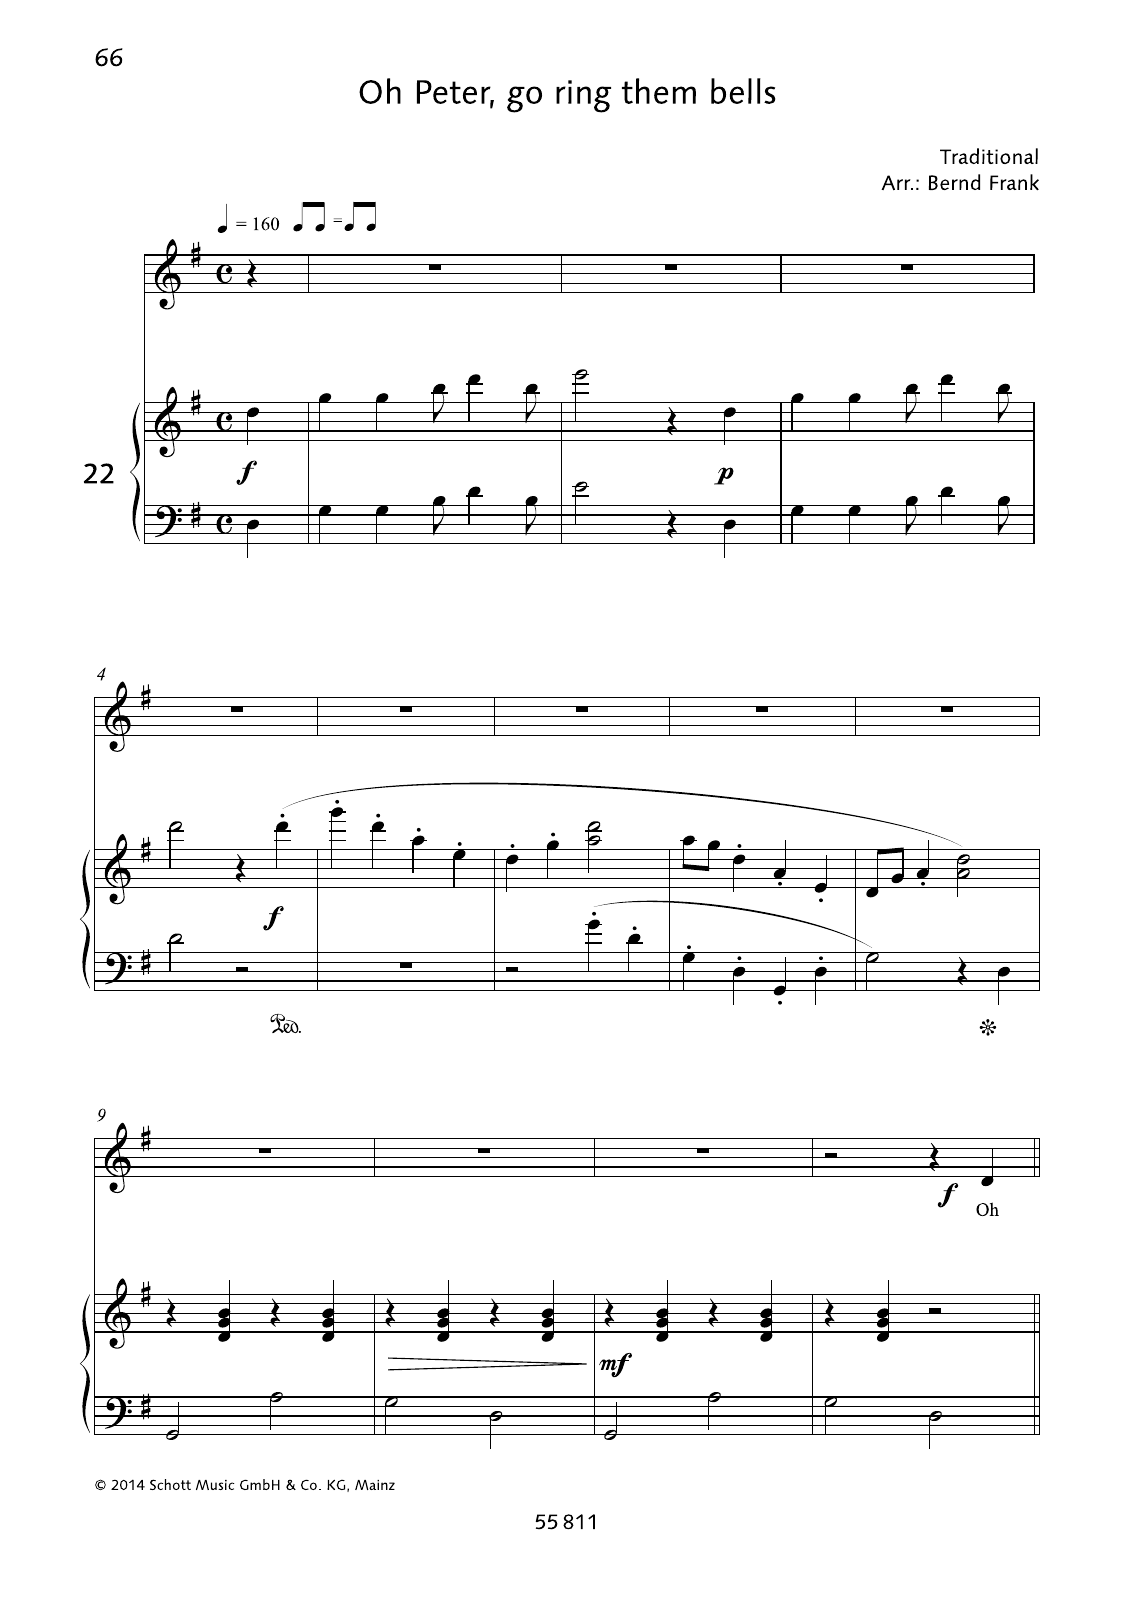 Bernd Frank Oh Peter, go ring them bells sheet music notes and chords. Download Printable PDF.